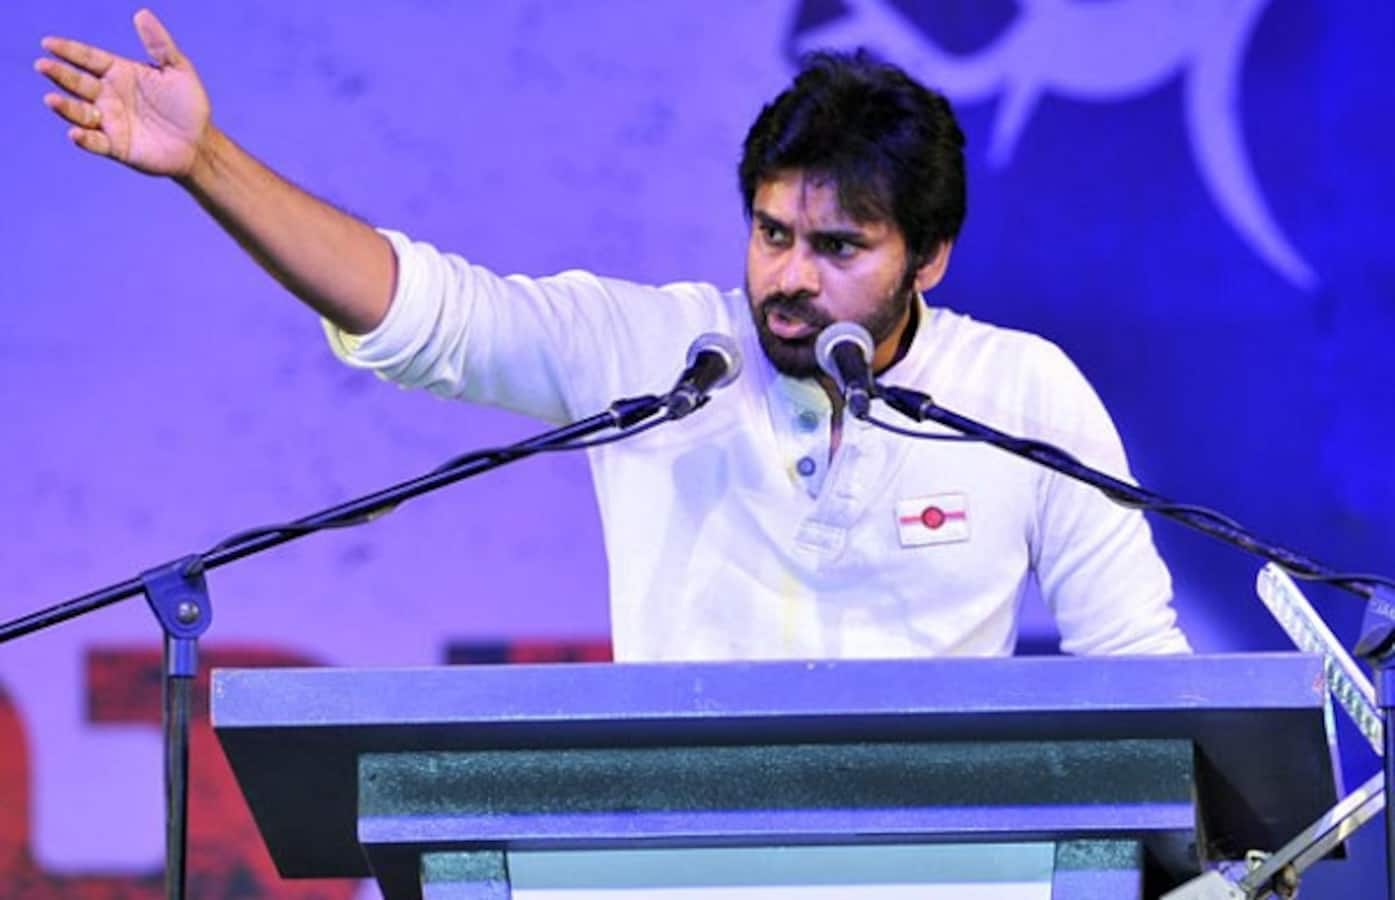 Pawan Kalyan's Jana Sena Party can now contest elections! - Bollywood News  & Gossip, Movie Reviews, Trailers & Videos at 